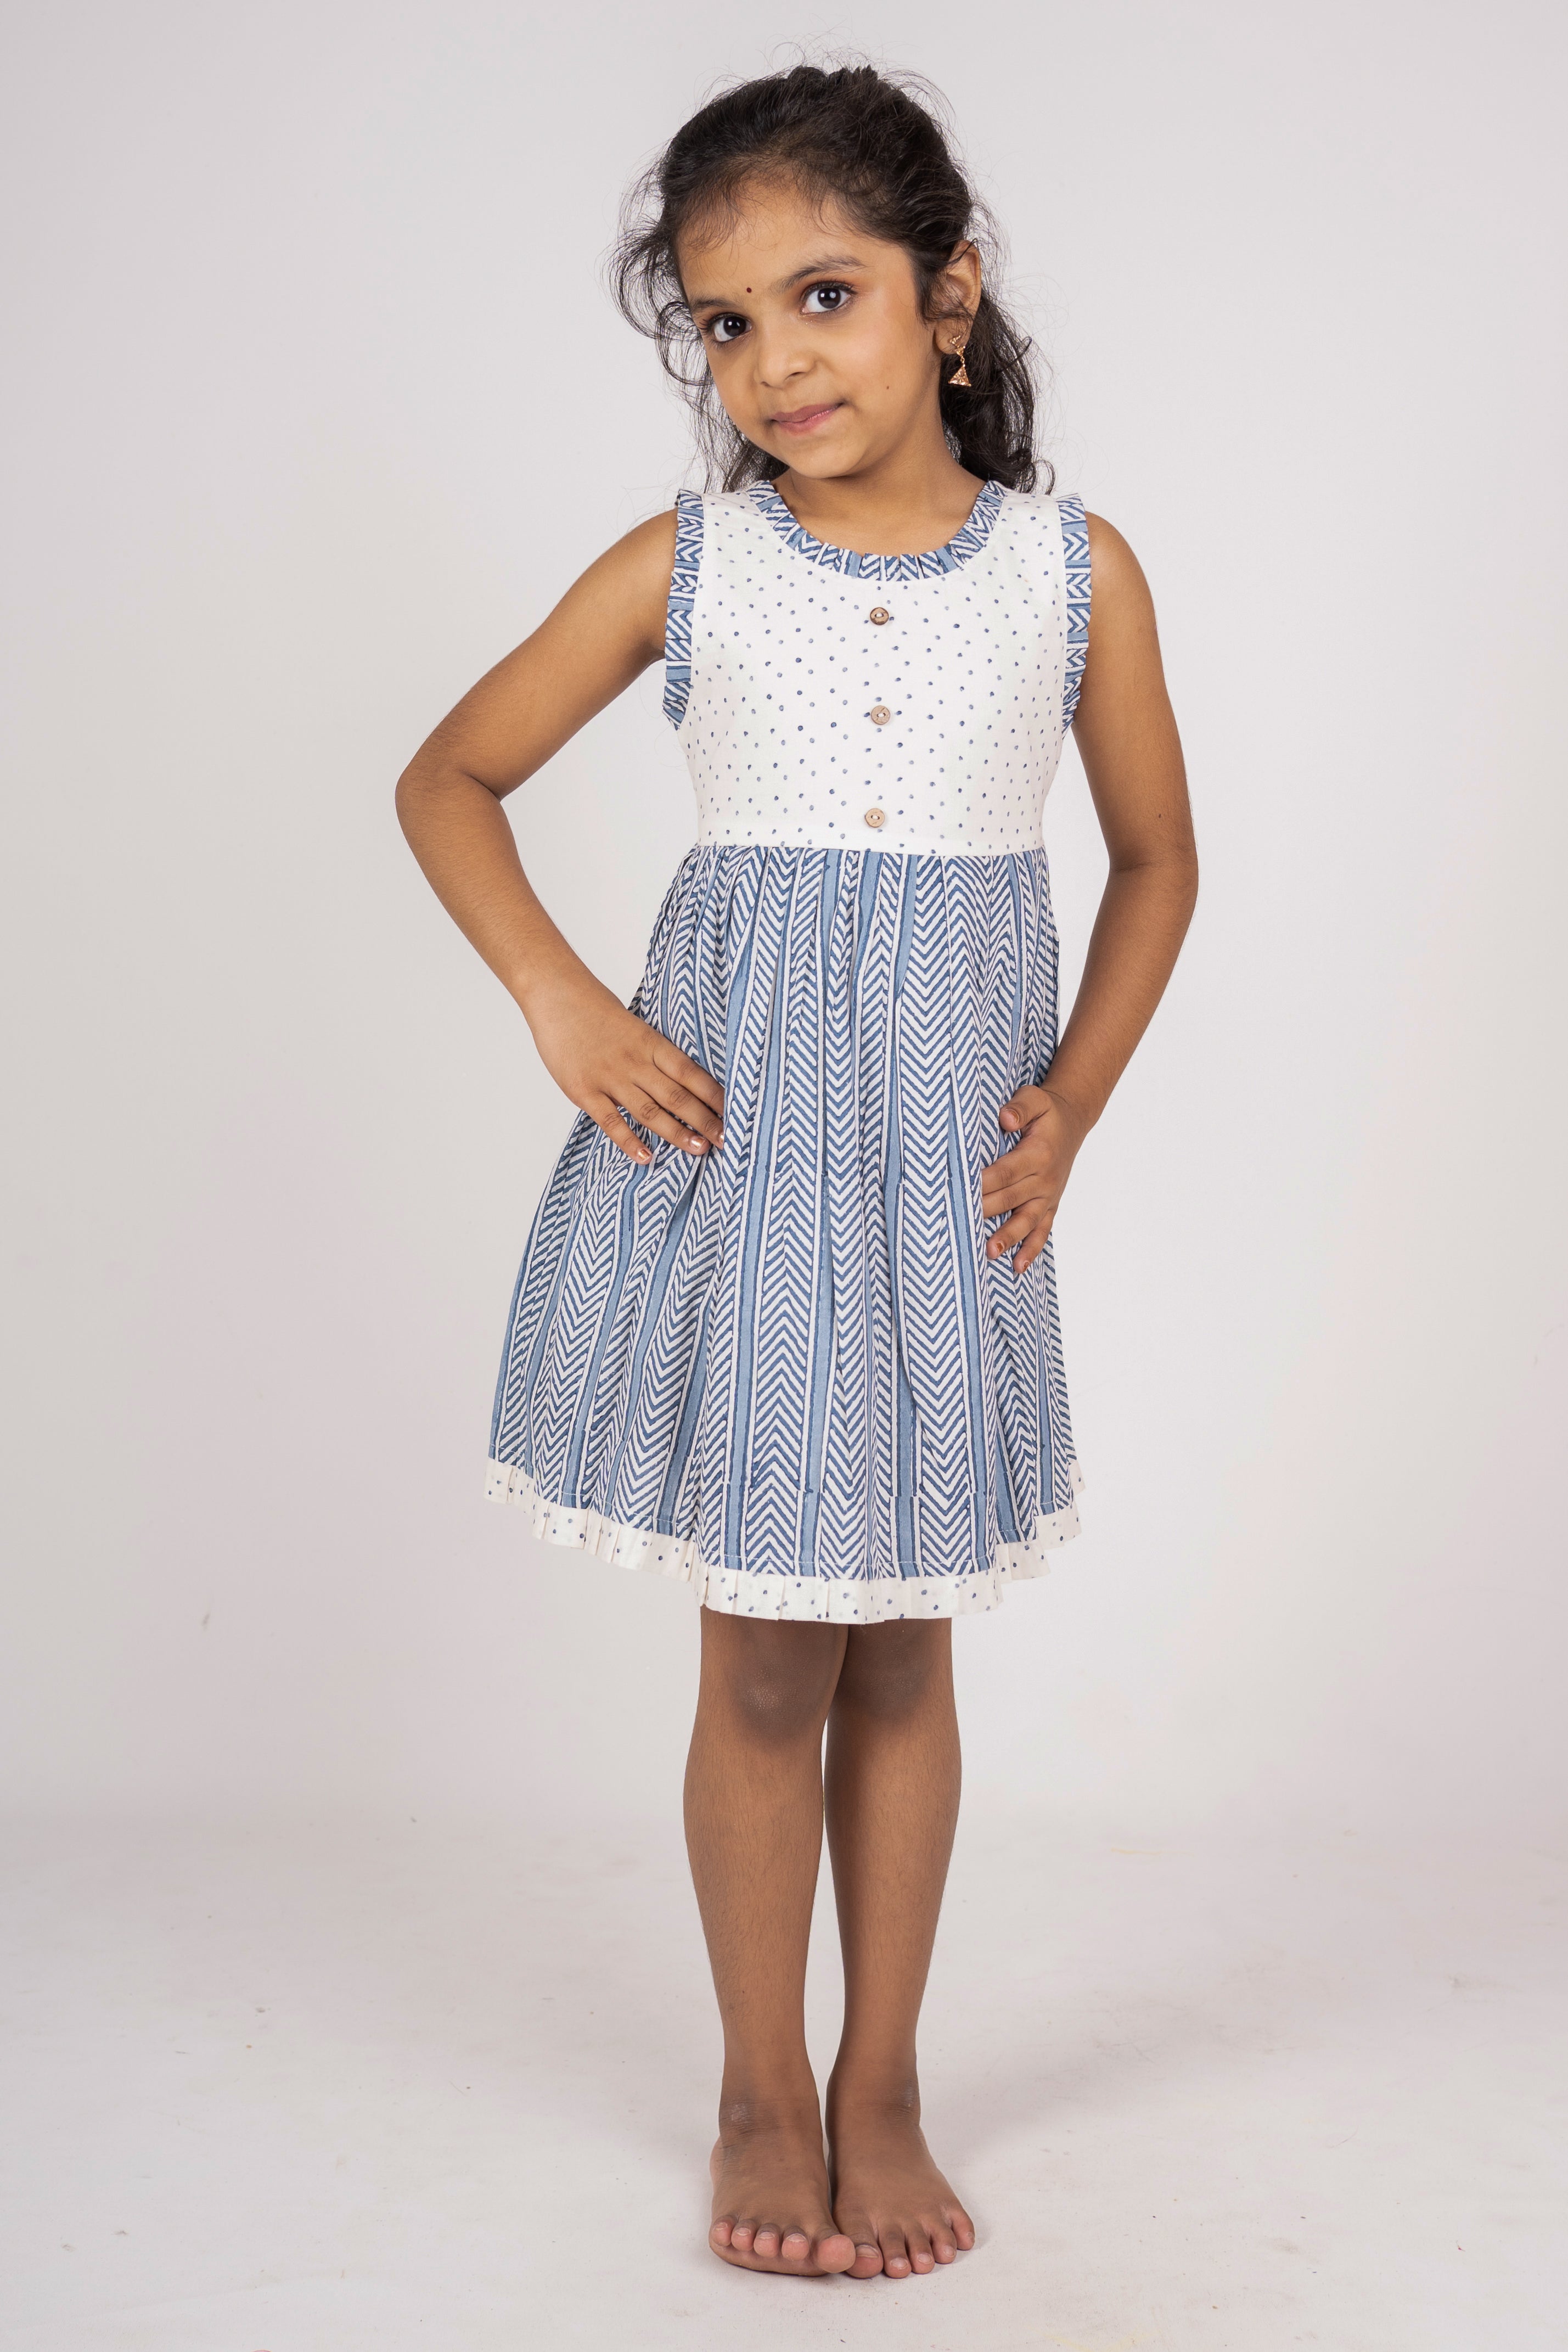 shivangi Party Wear Cotton Frocks Age Group 15 Years